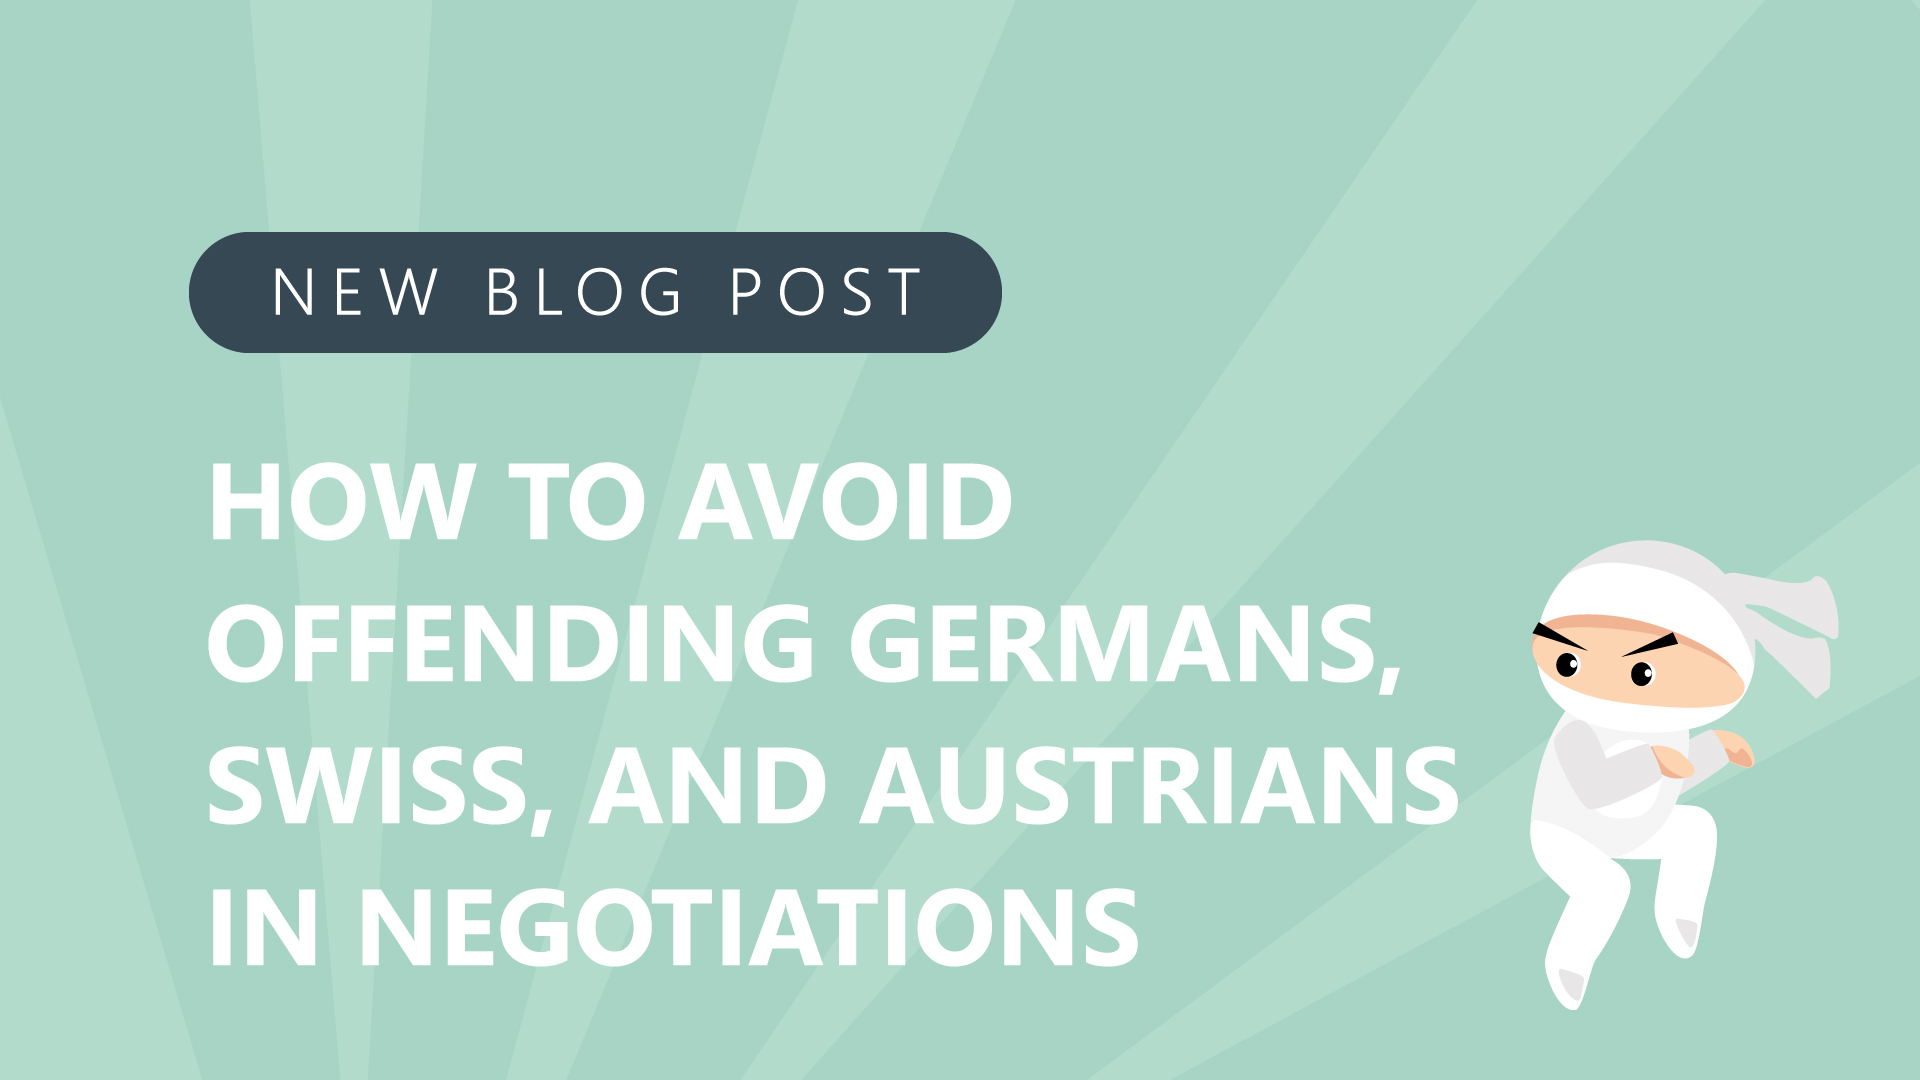 How-to-Avoid-Offending-Germans-Swiss-and-Austrians-in-Negotiations.jpg